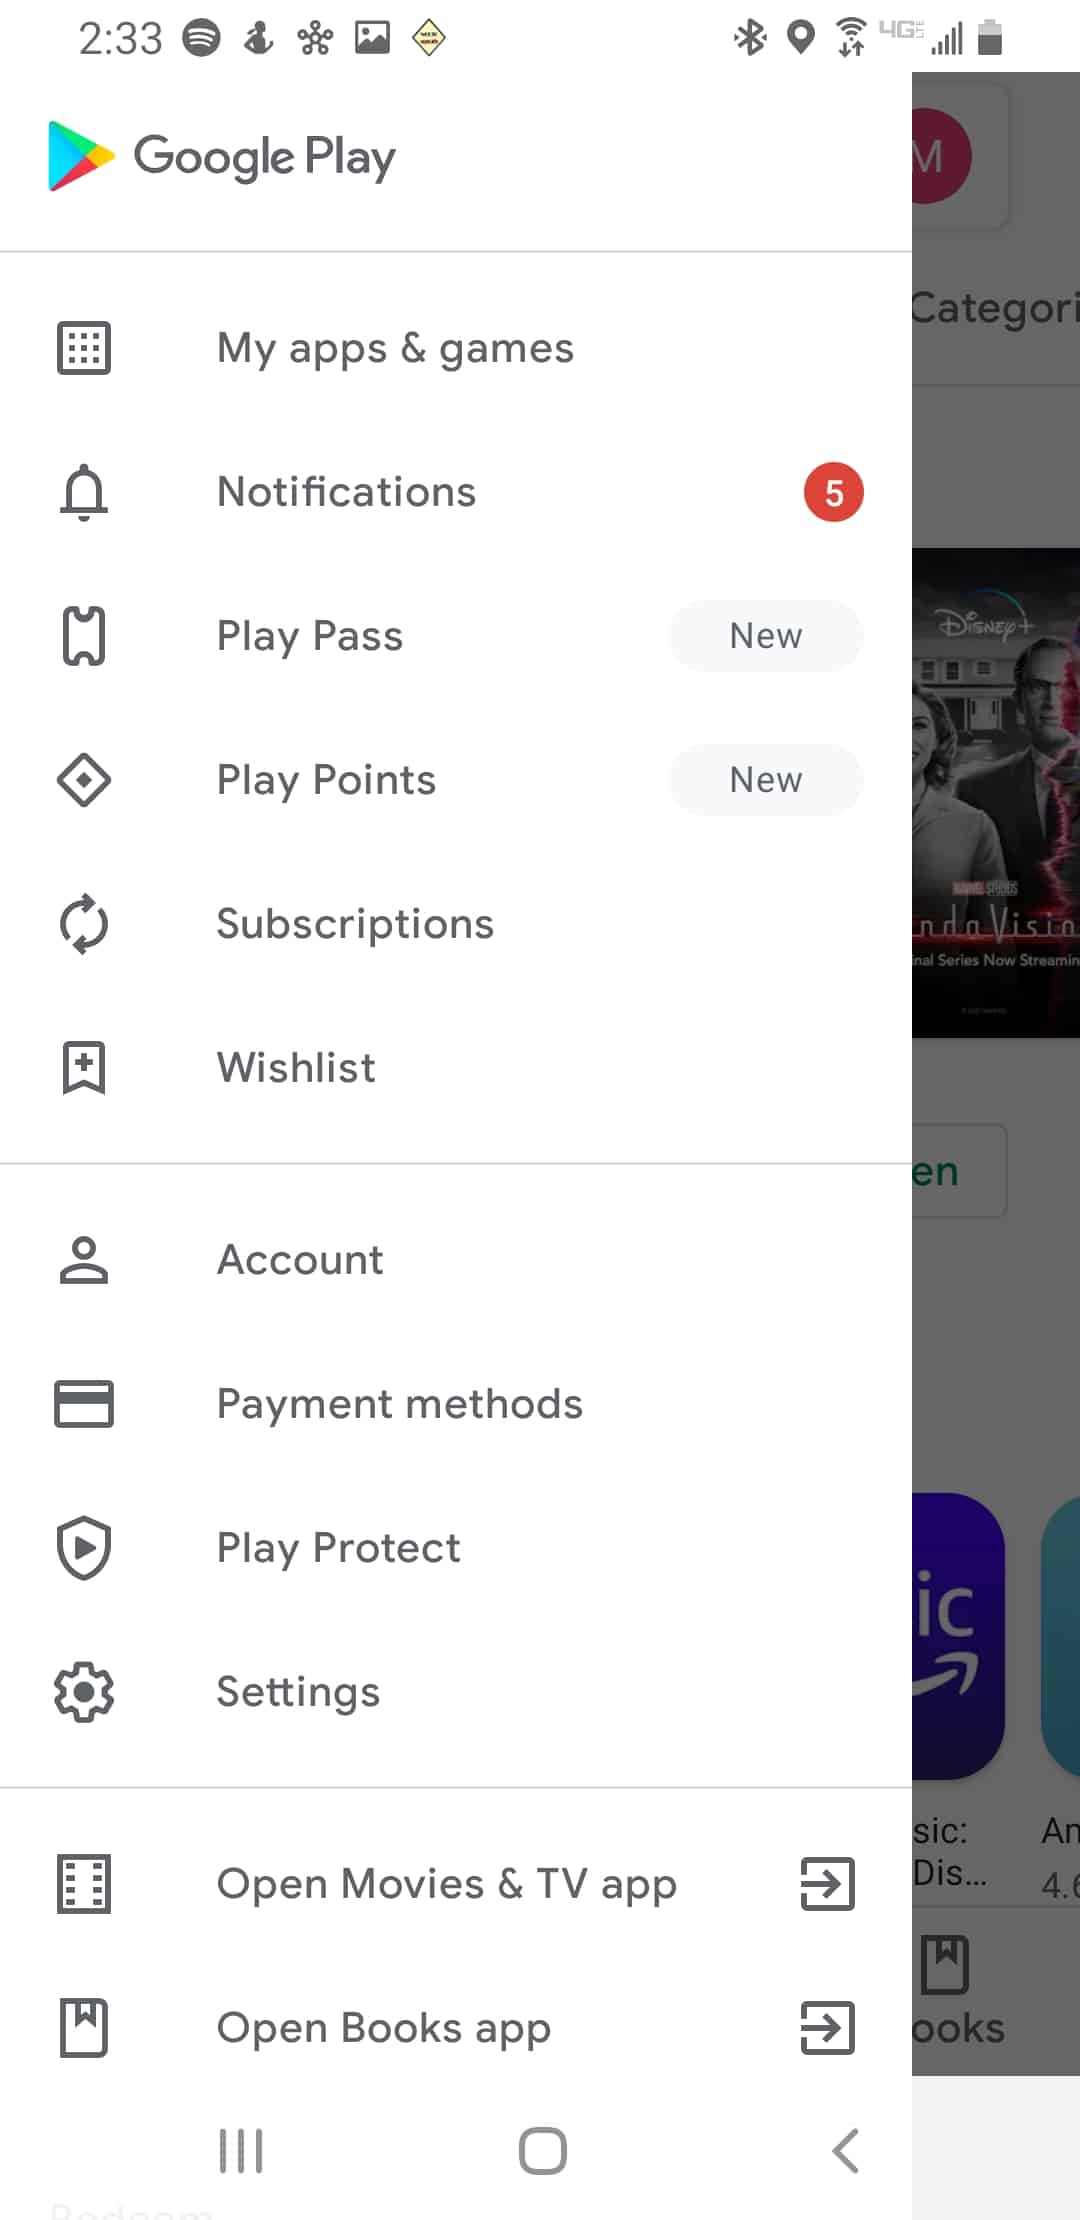 Turn on Protect Play Android - Google Play Menu